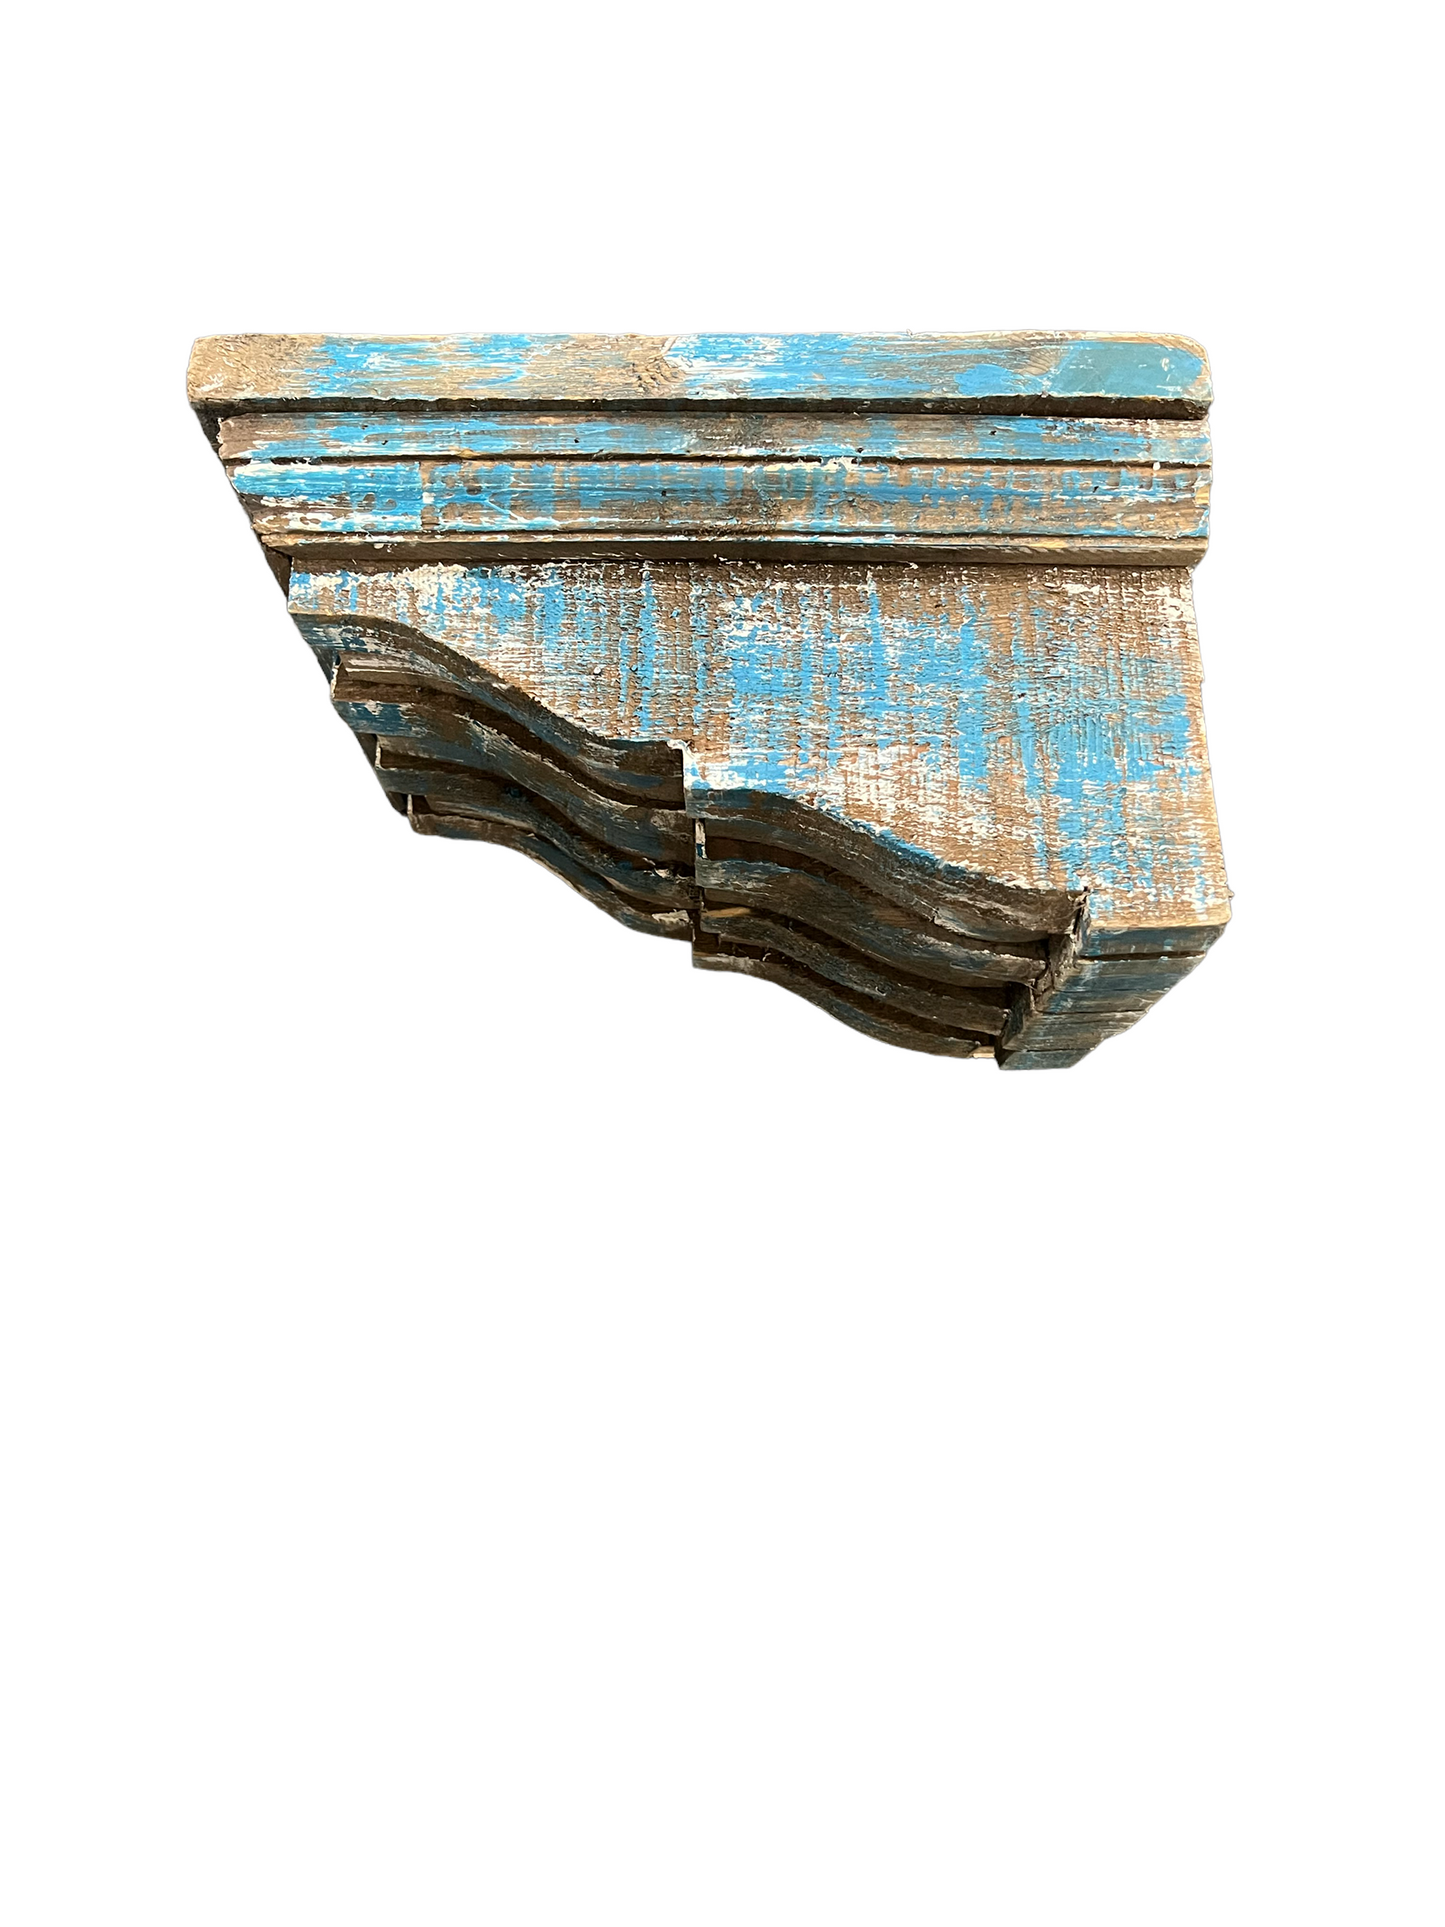 Distressed Teal Wooden Corbels